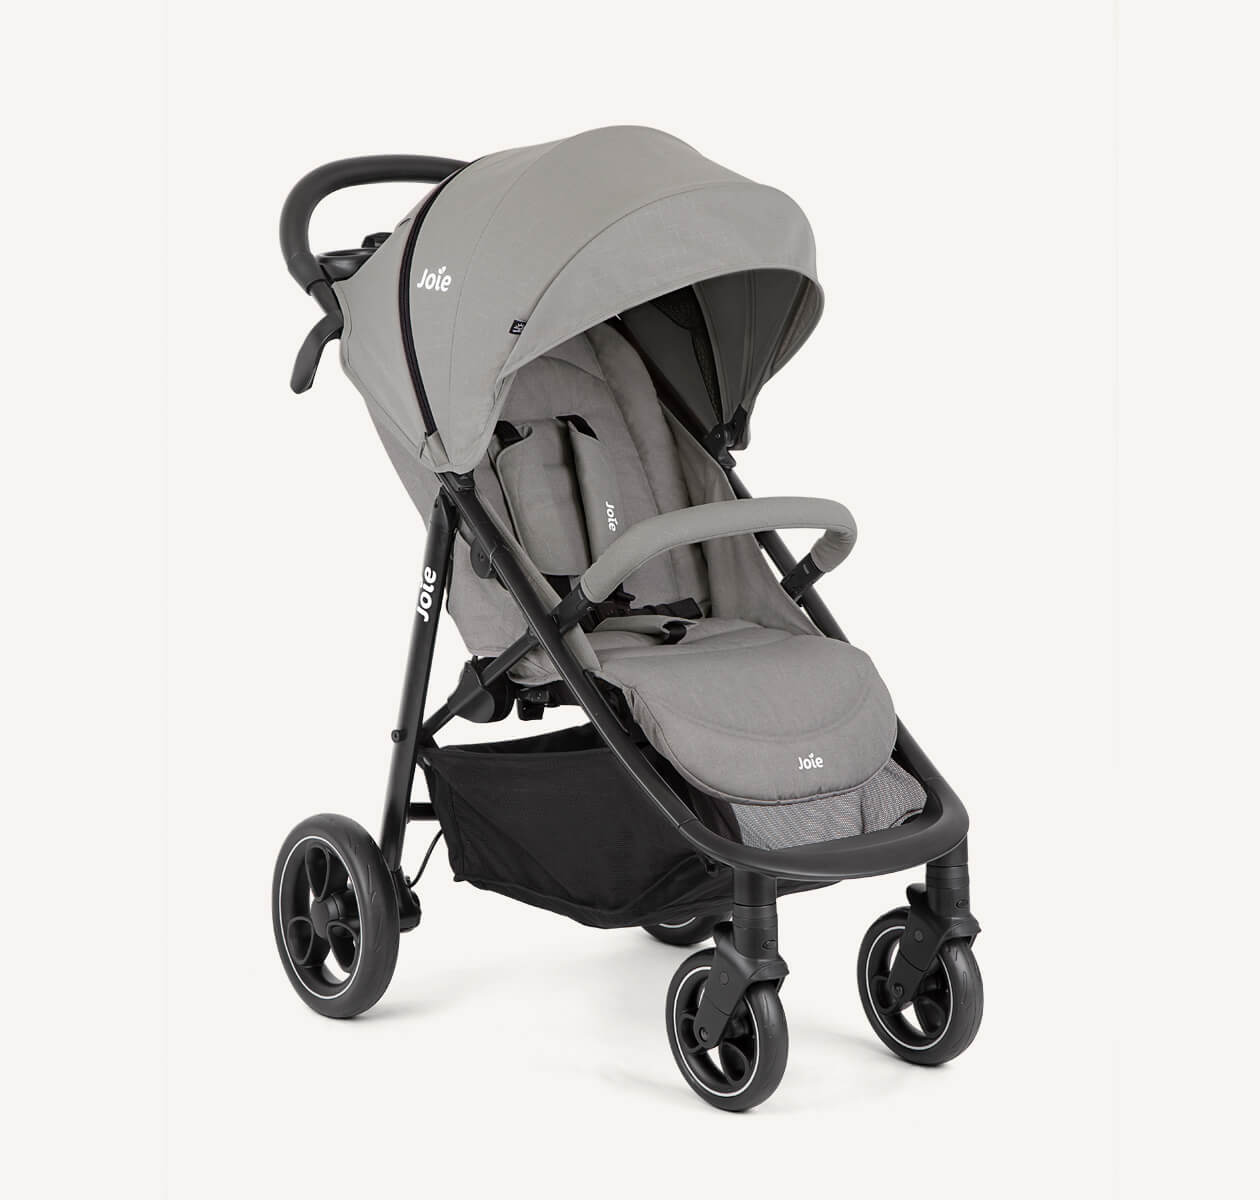 Joie gray litetrax stroller at an angle. 